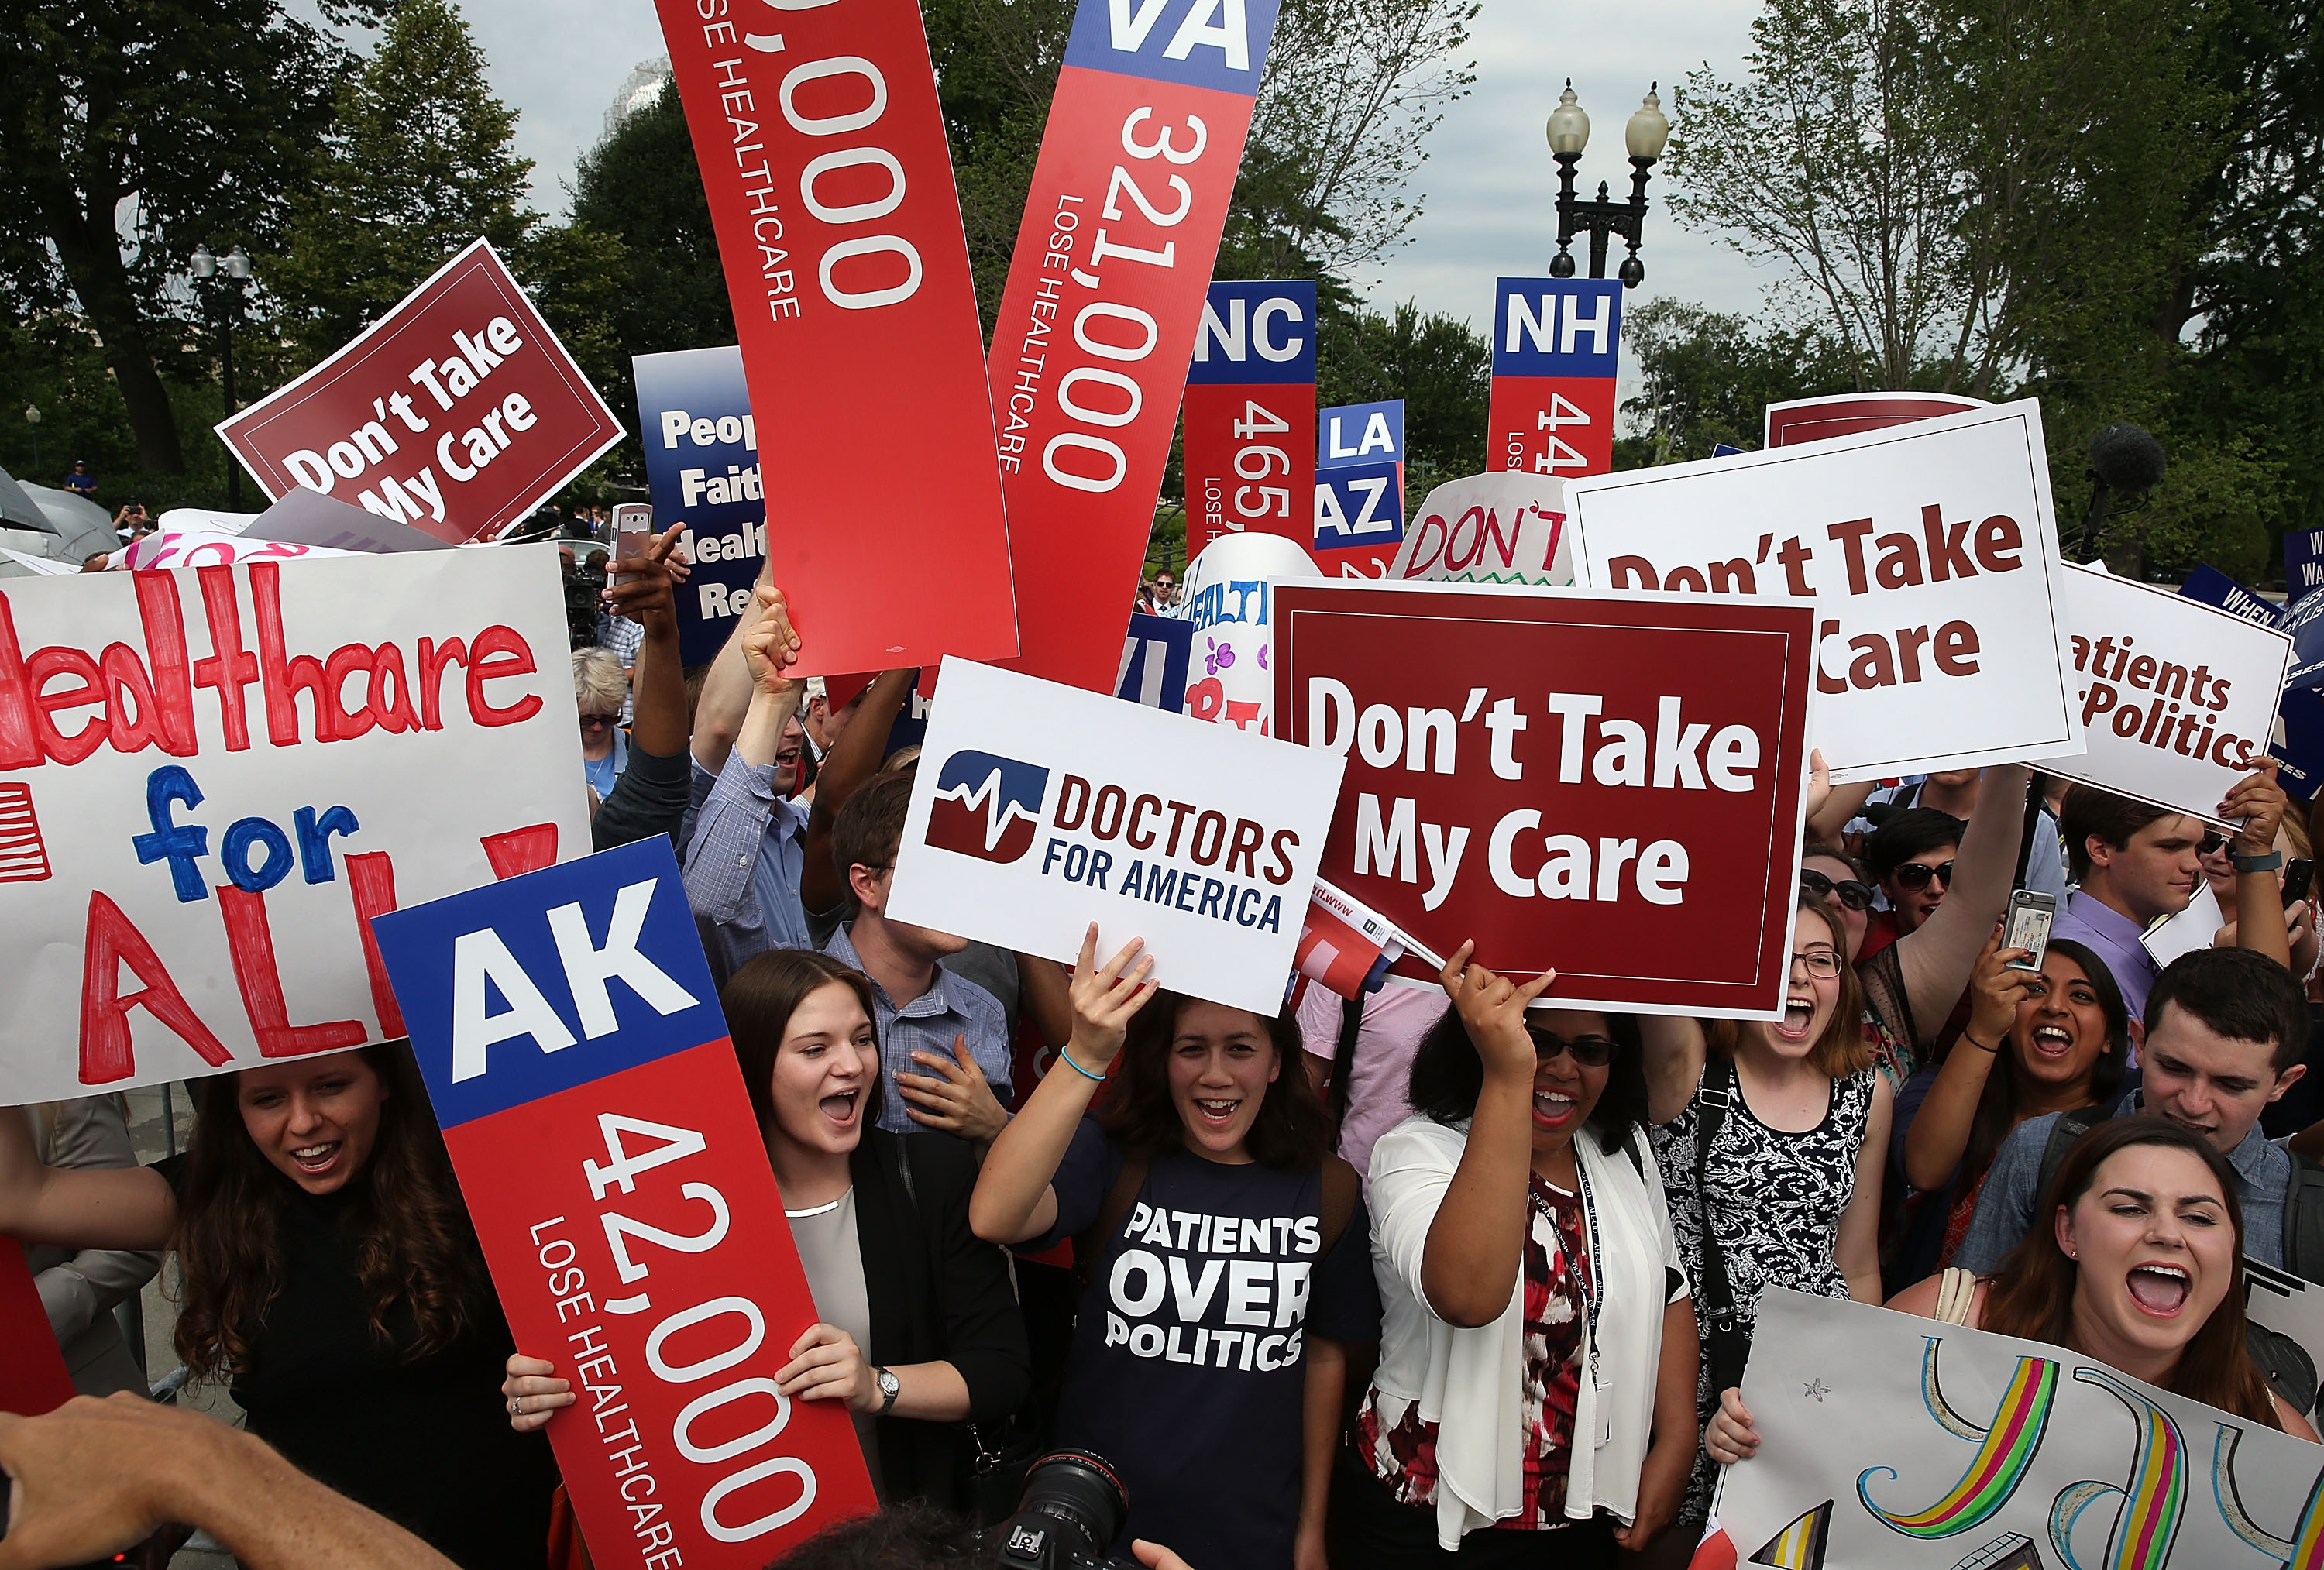 ObamaCare supporters cheer in front of the Supreme Court building